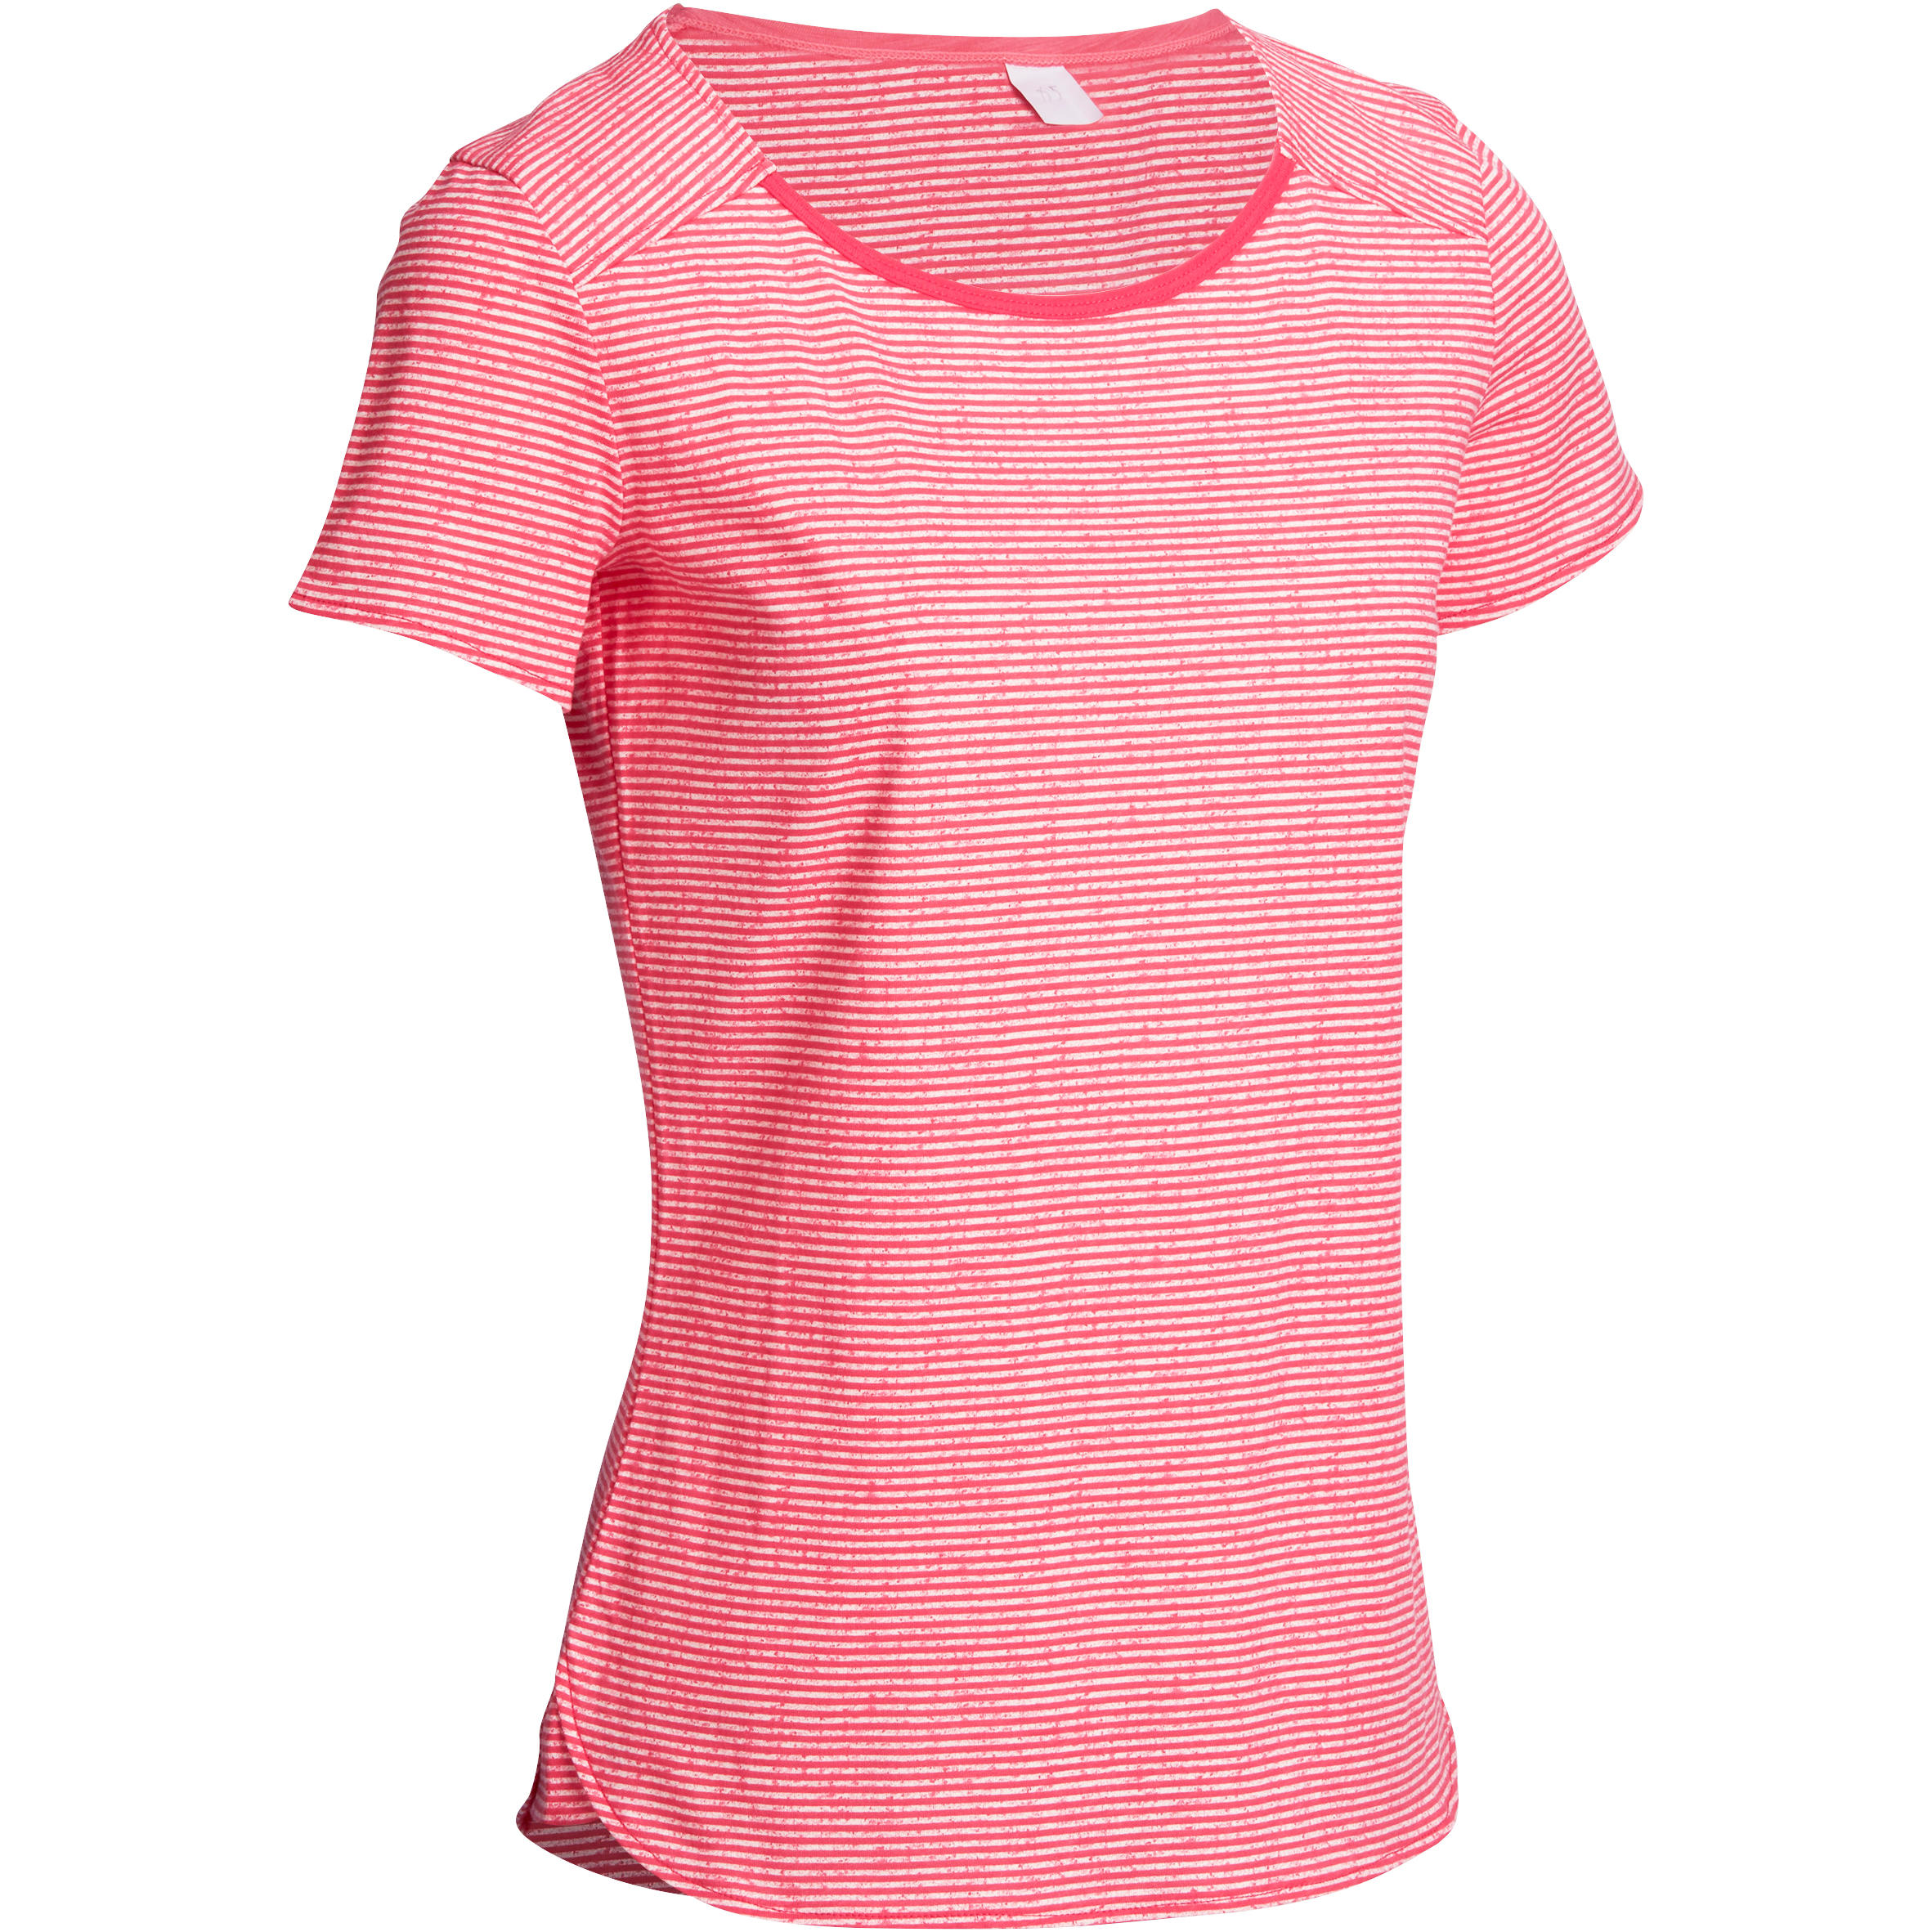 DOMYOS Women's Gym and Pilates T-Shirt - Striped Pink